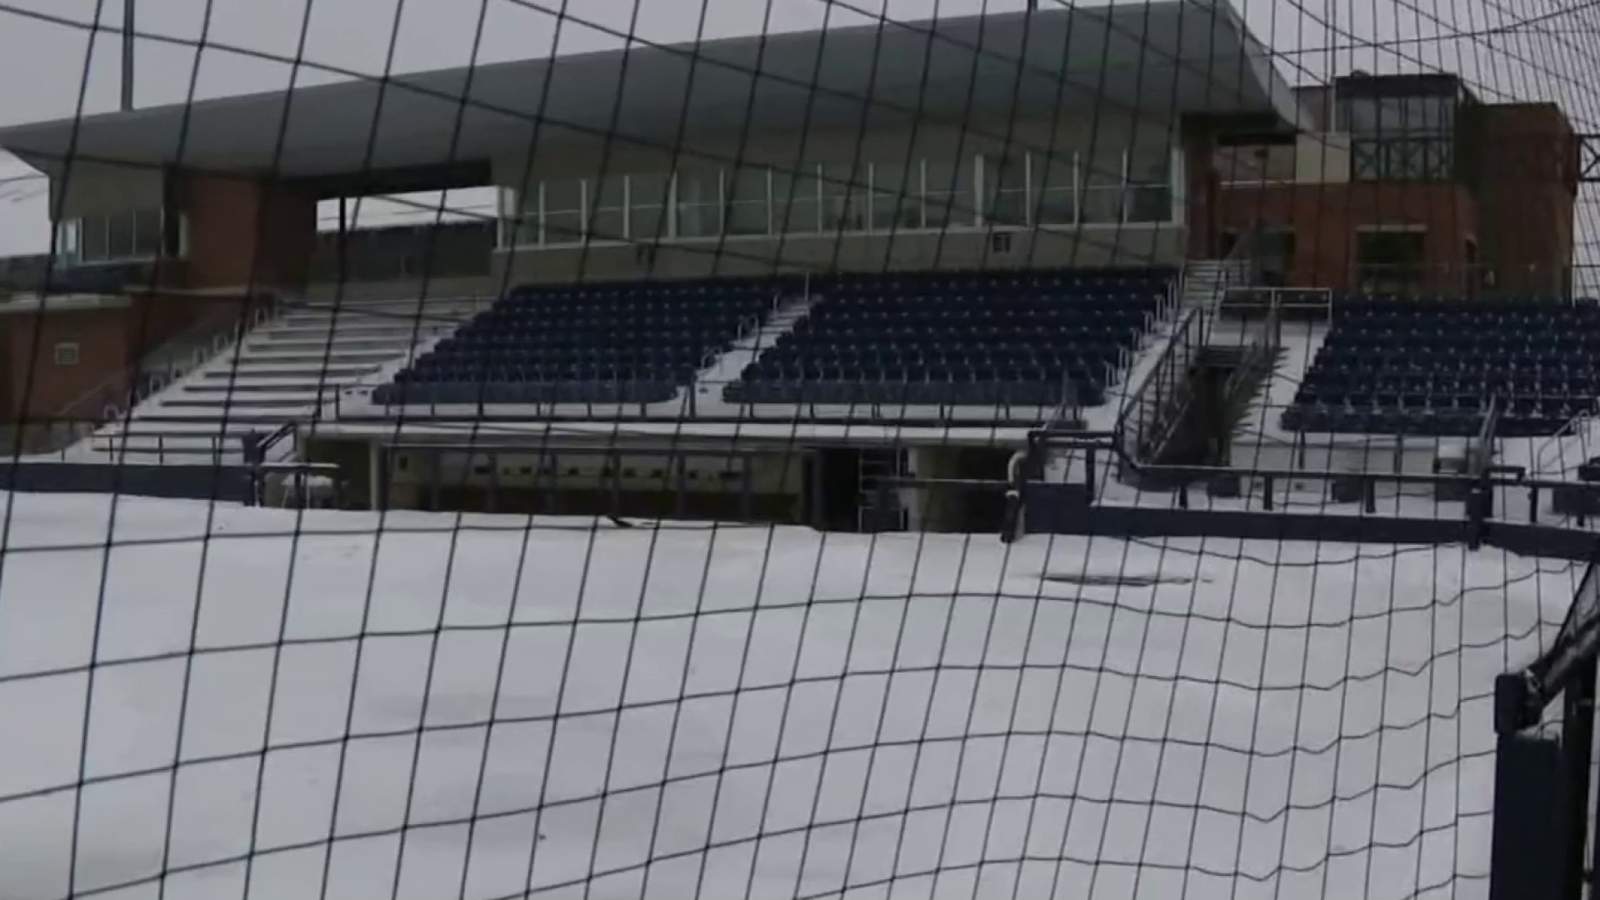 University of Michigan-Dearborn athletes fighting to play this spring after season cancellation